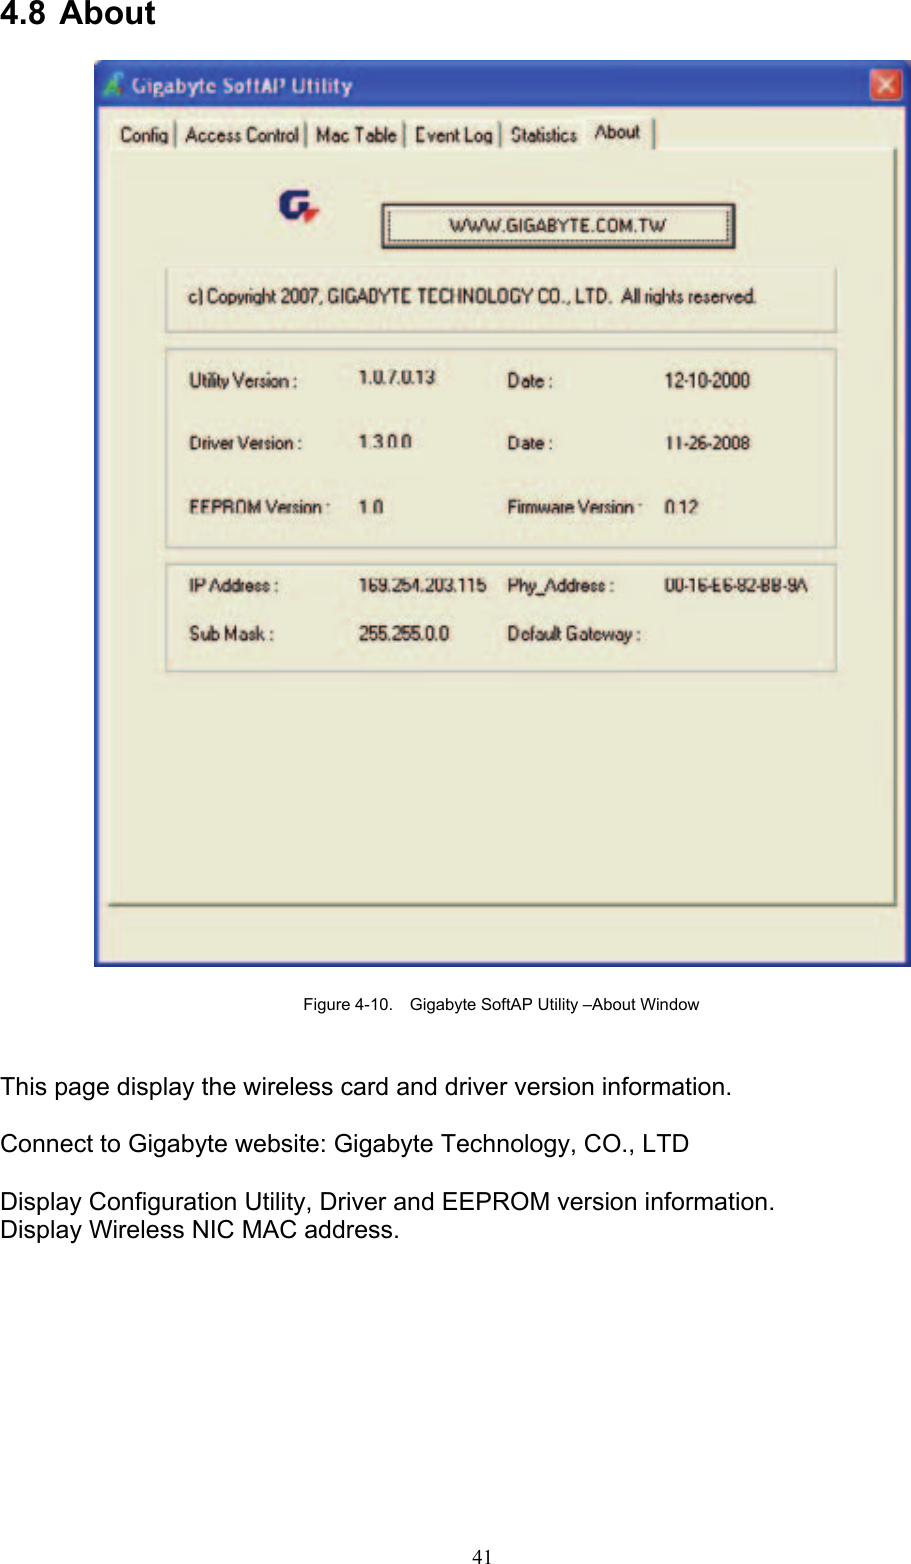 41   4.8 About    Figure 4-10.    Gigabyte SoftAP Utility –About Window   This page display the wireless card and driver version information.  Connect to Gigabyte website: Gigabyte Technology, CO., LTD  Display Configuration Utility, Driver and EEPROM version information. Display Wireless NIC MAC address.  